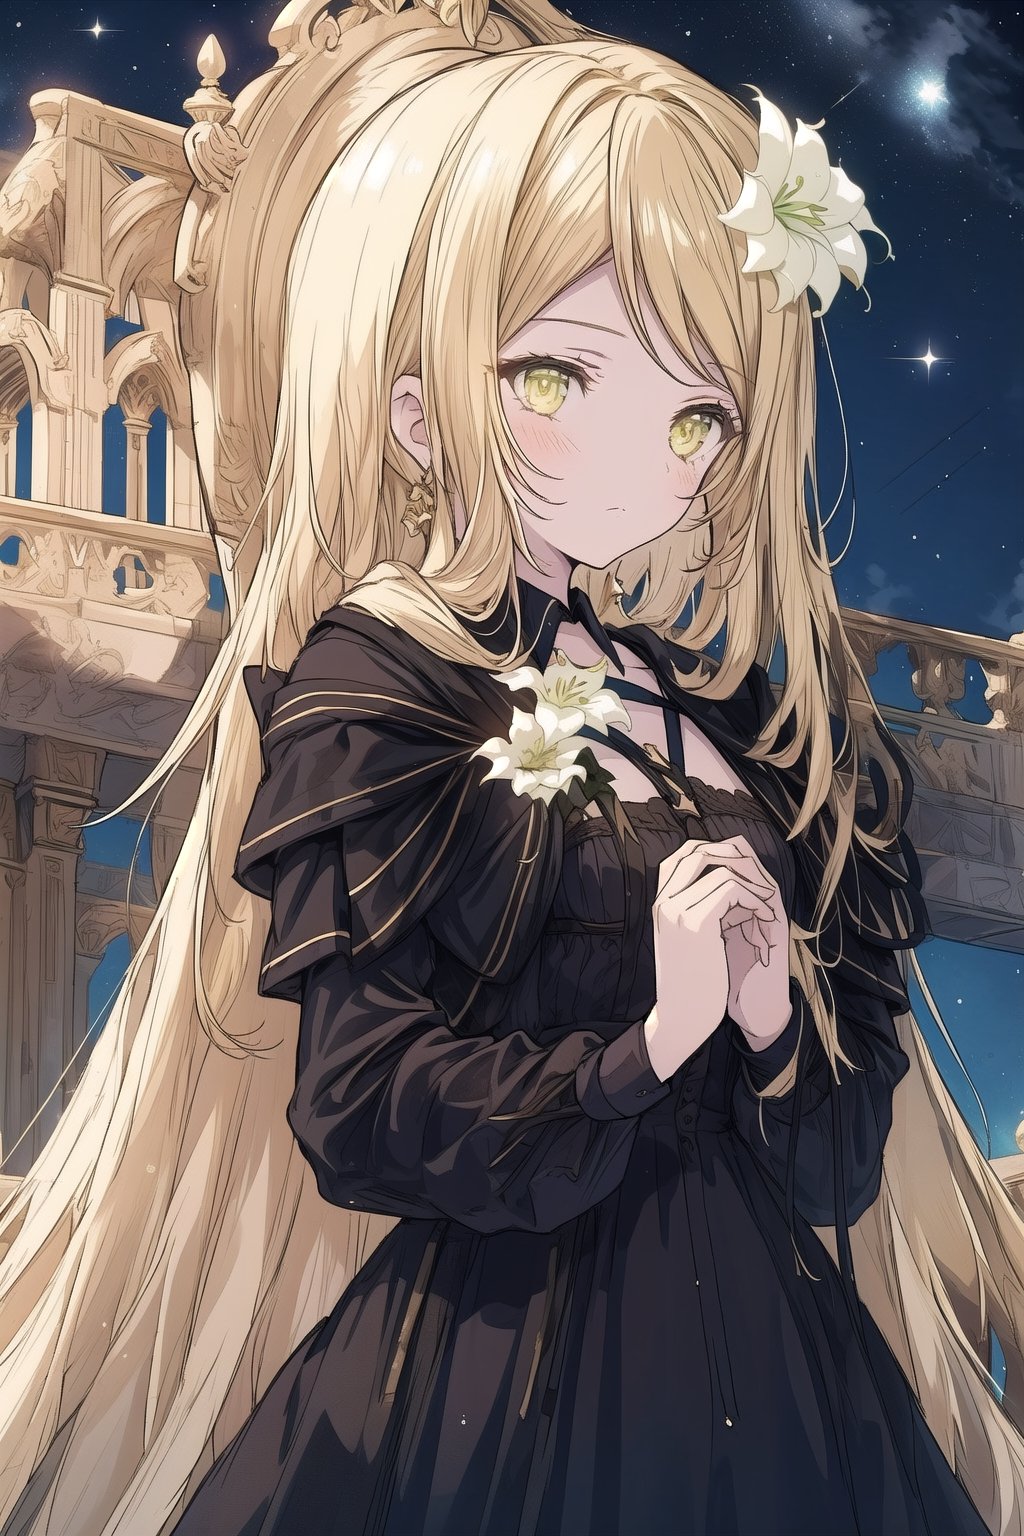 1 girl, surrounded by energy, long blonde hair, wavy hair, golden eyes, black dress, white lily, palace exterior elegant, palace, cold expression, high quality, shiny hair, detailed dress,fantasy00d, starry sky, pretty black dress, outdoors, solo, balcony, perfect hands